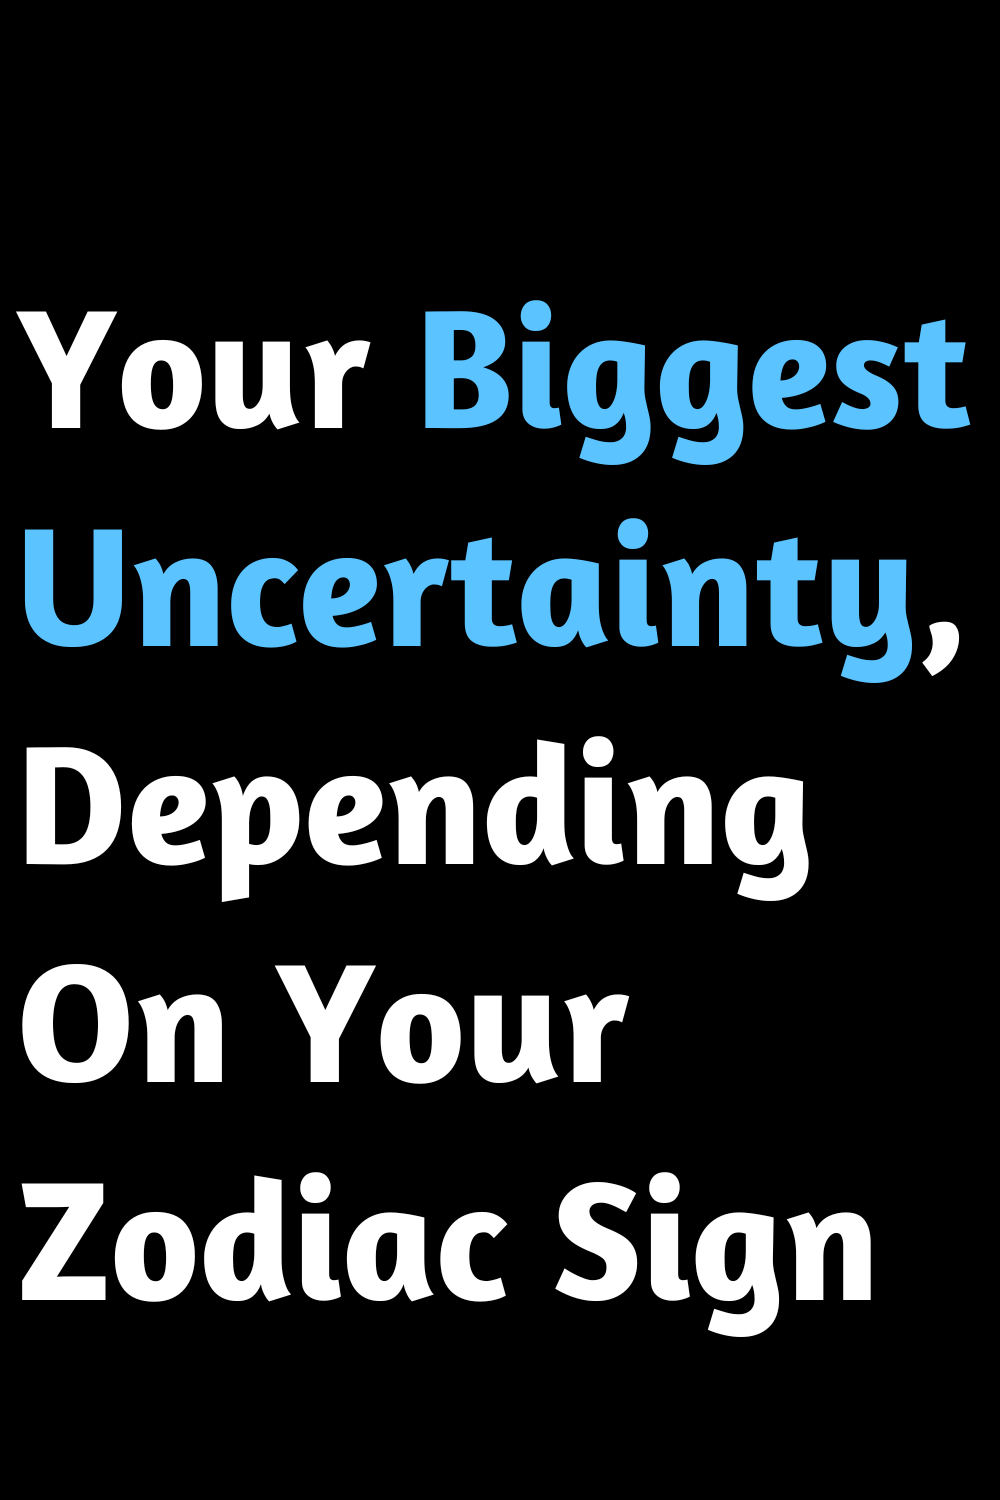 Your Biggest Uncertainty, Depending On Your Zodiac Sign